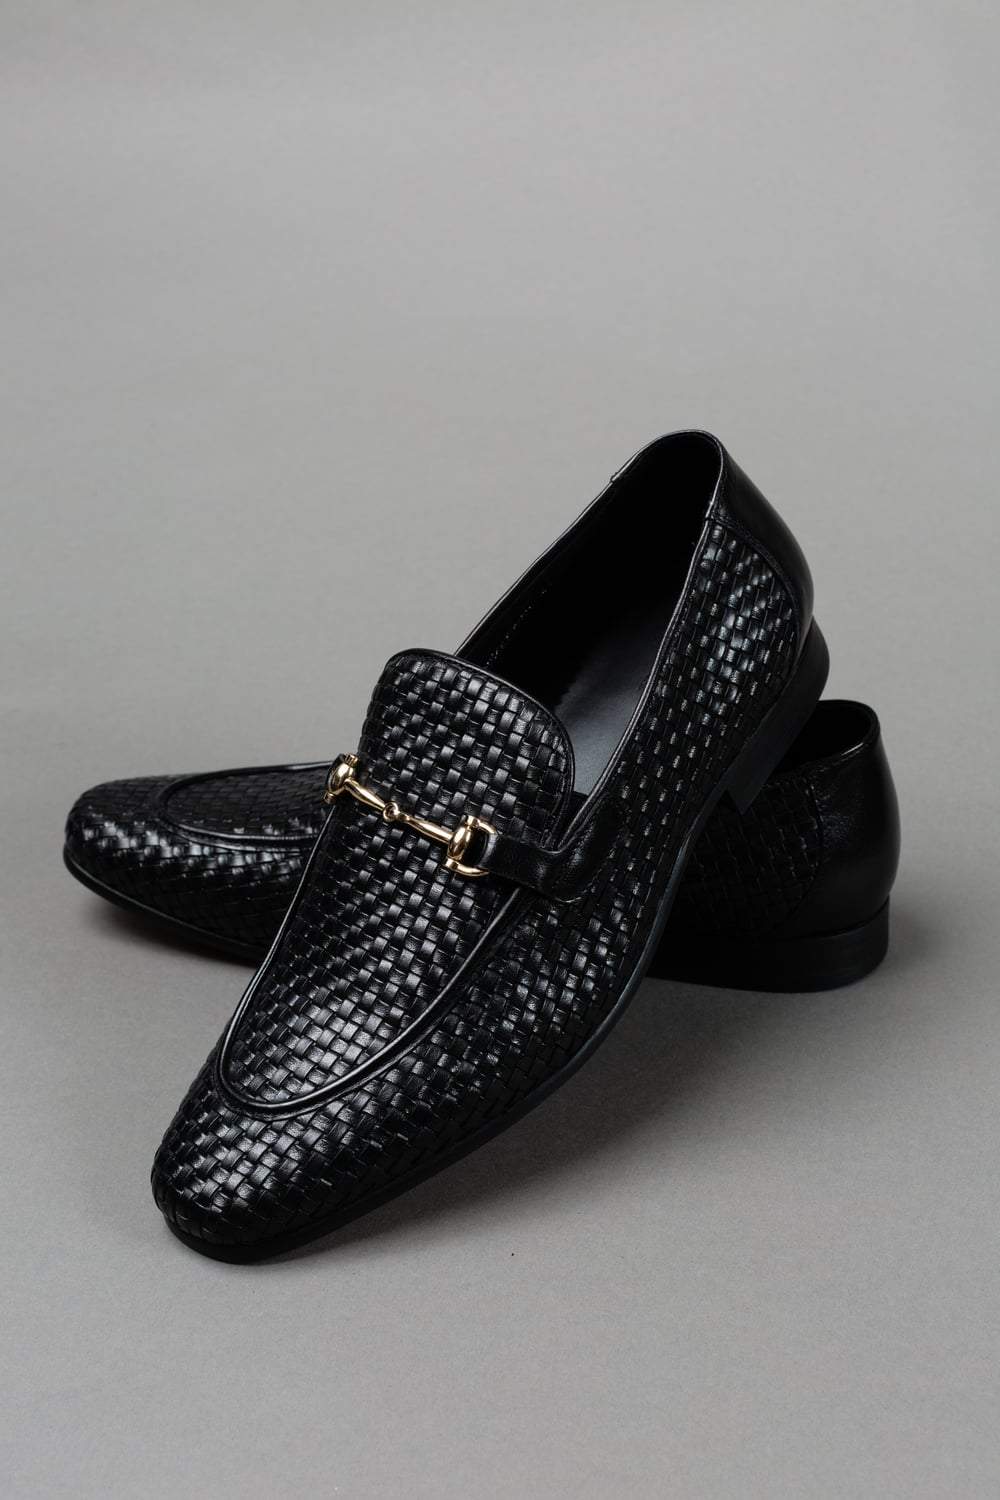 Woven Black Leather Loafer